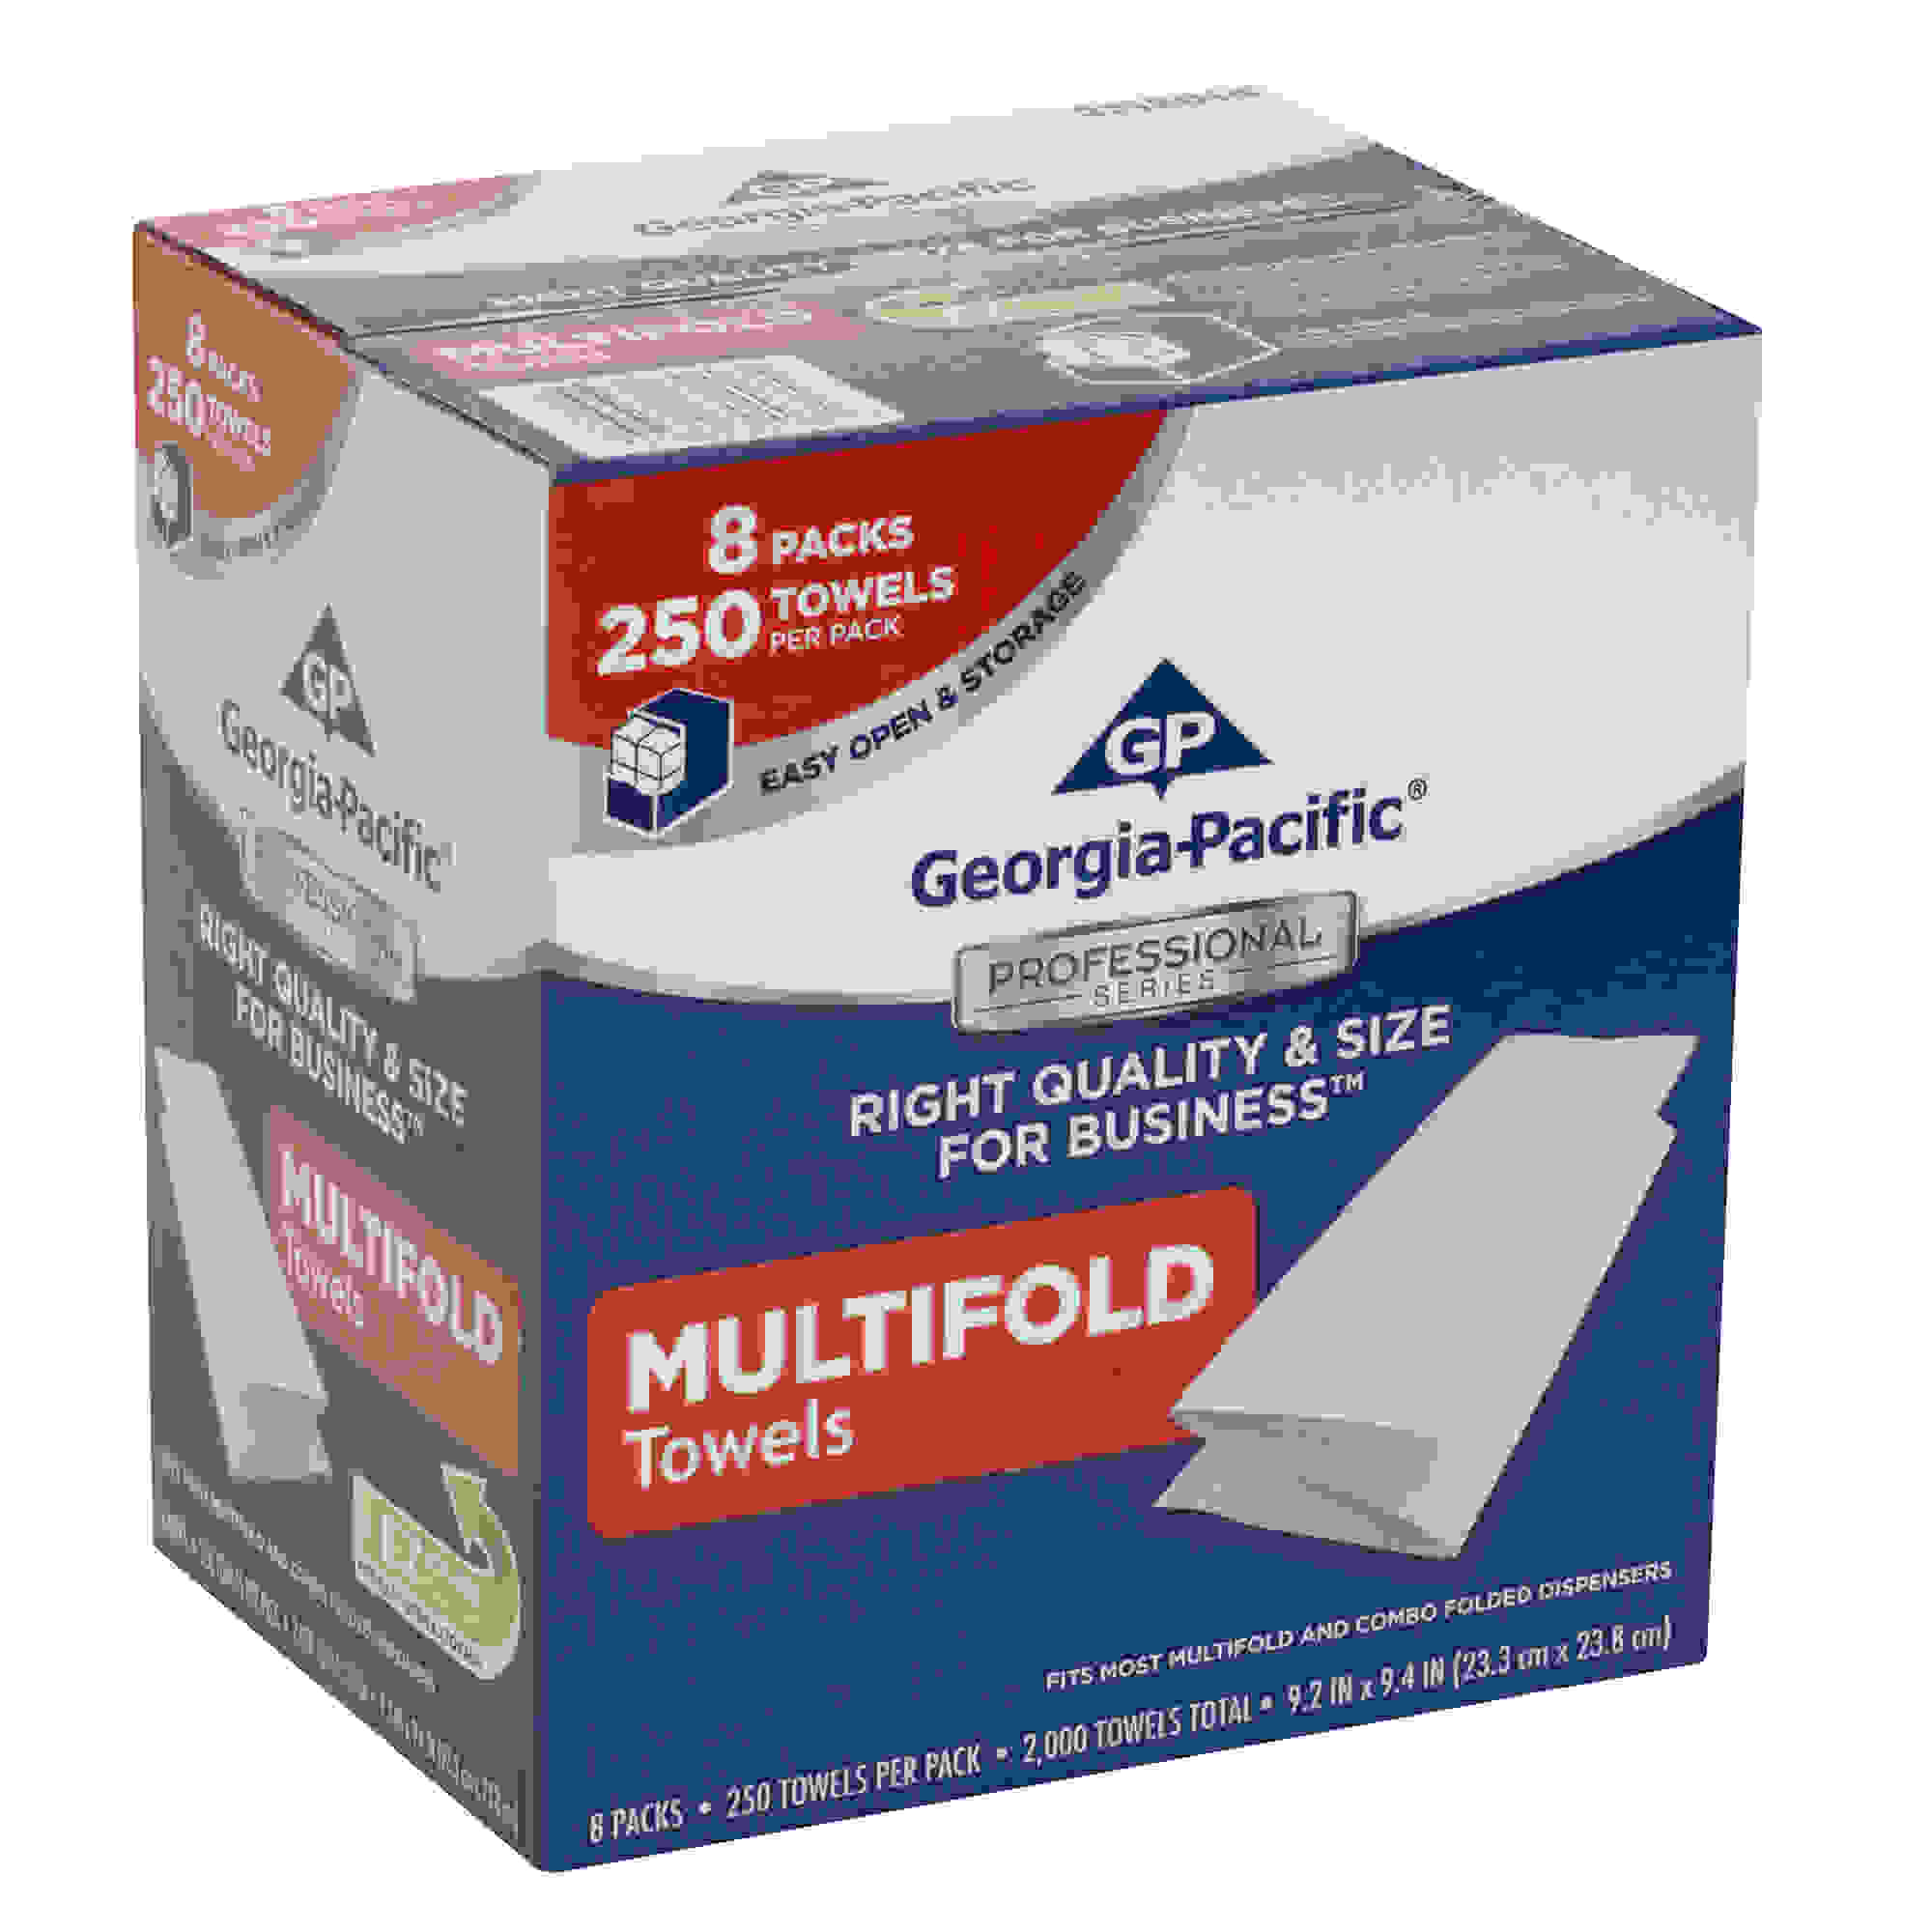 PROFESSIONAL SERIES� 1-PLY M-FOLD PAPER TOWELS, WHITE, CONVENIENCE PACK, 8 PACKS PER CASE